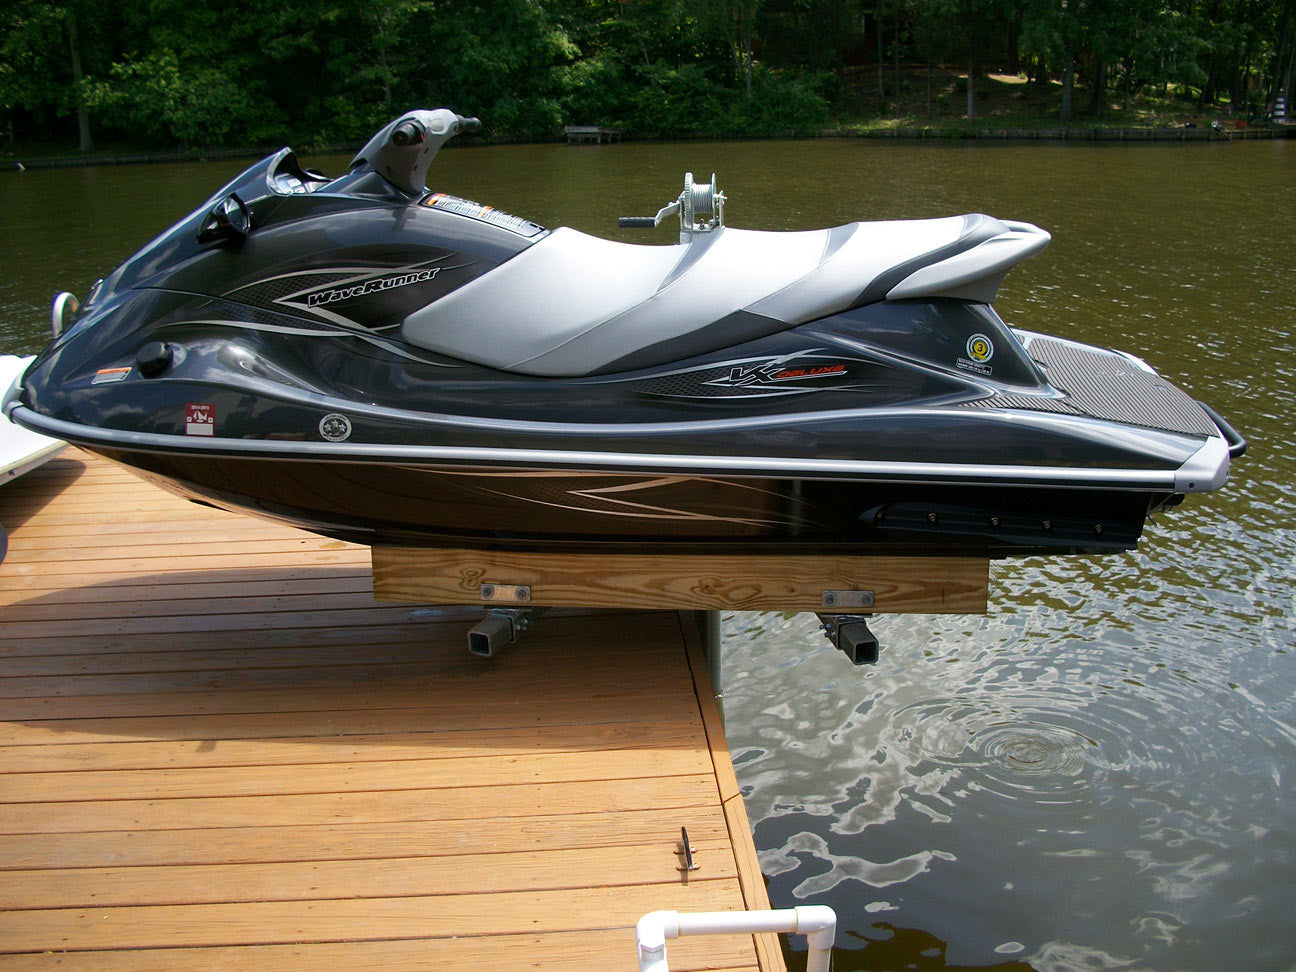 Photos of our Mr. Lifter jet ski lift. For more information, please 